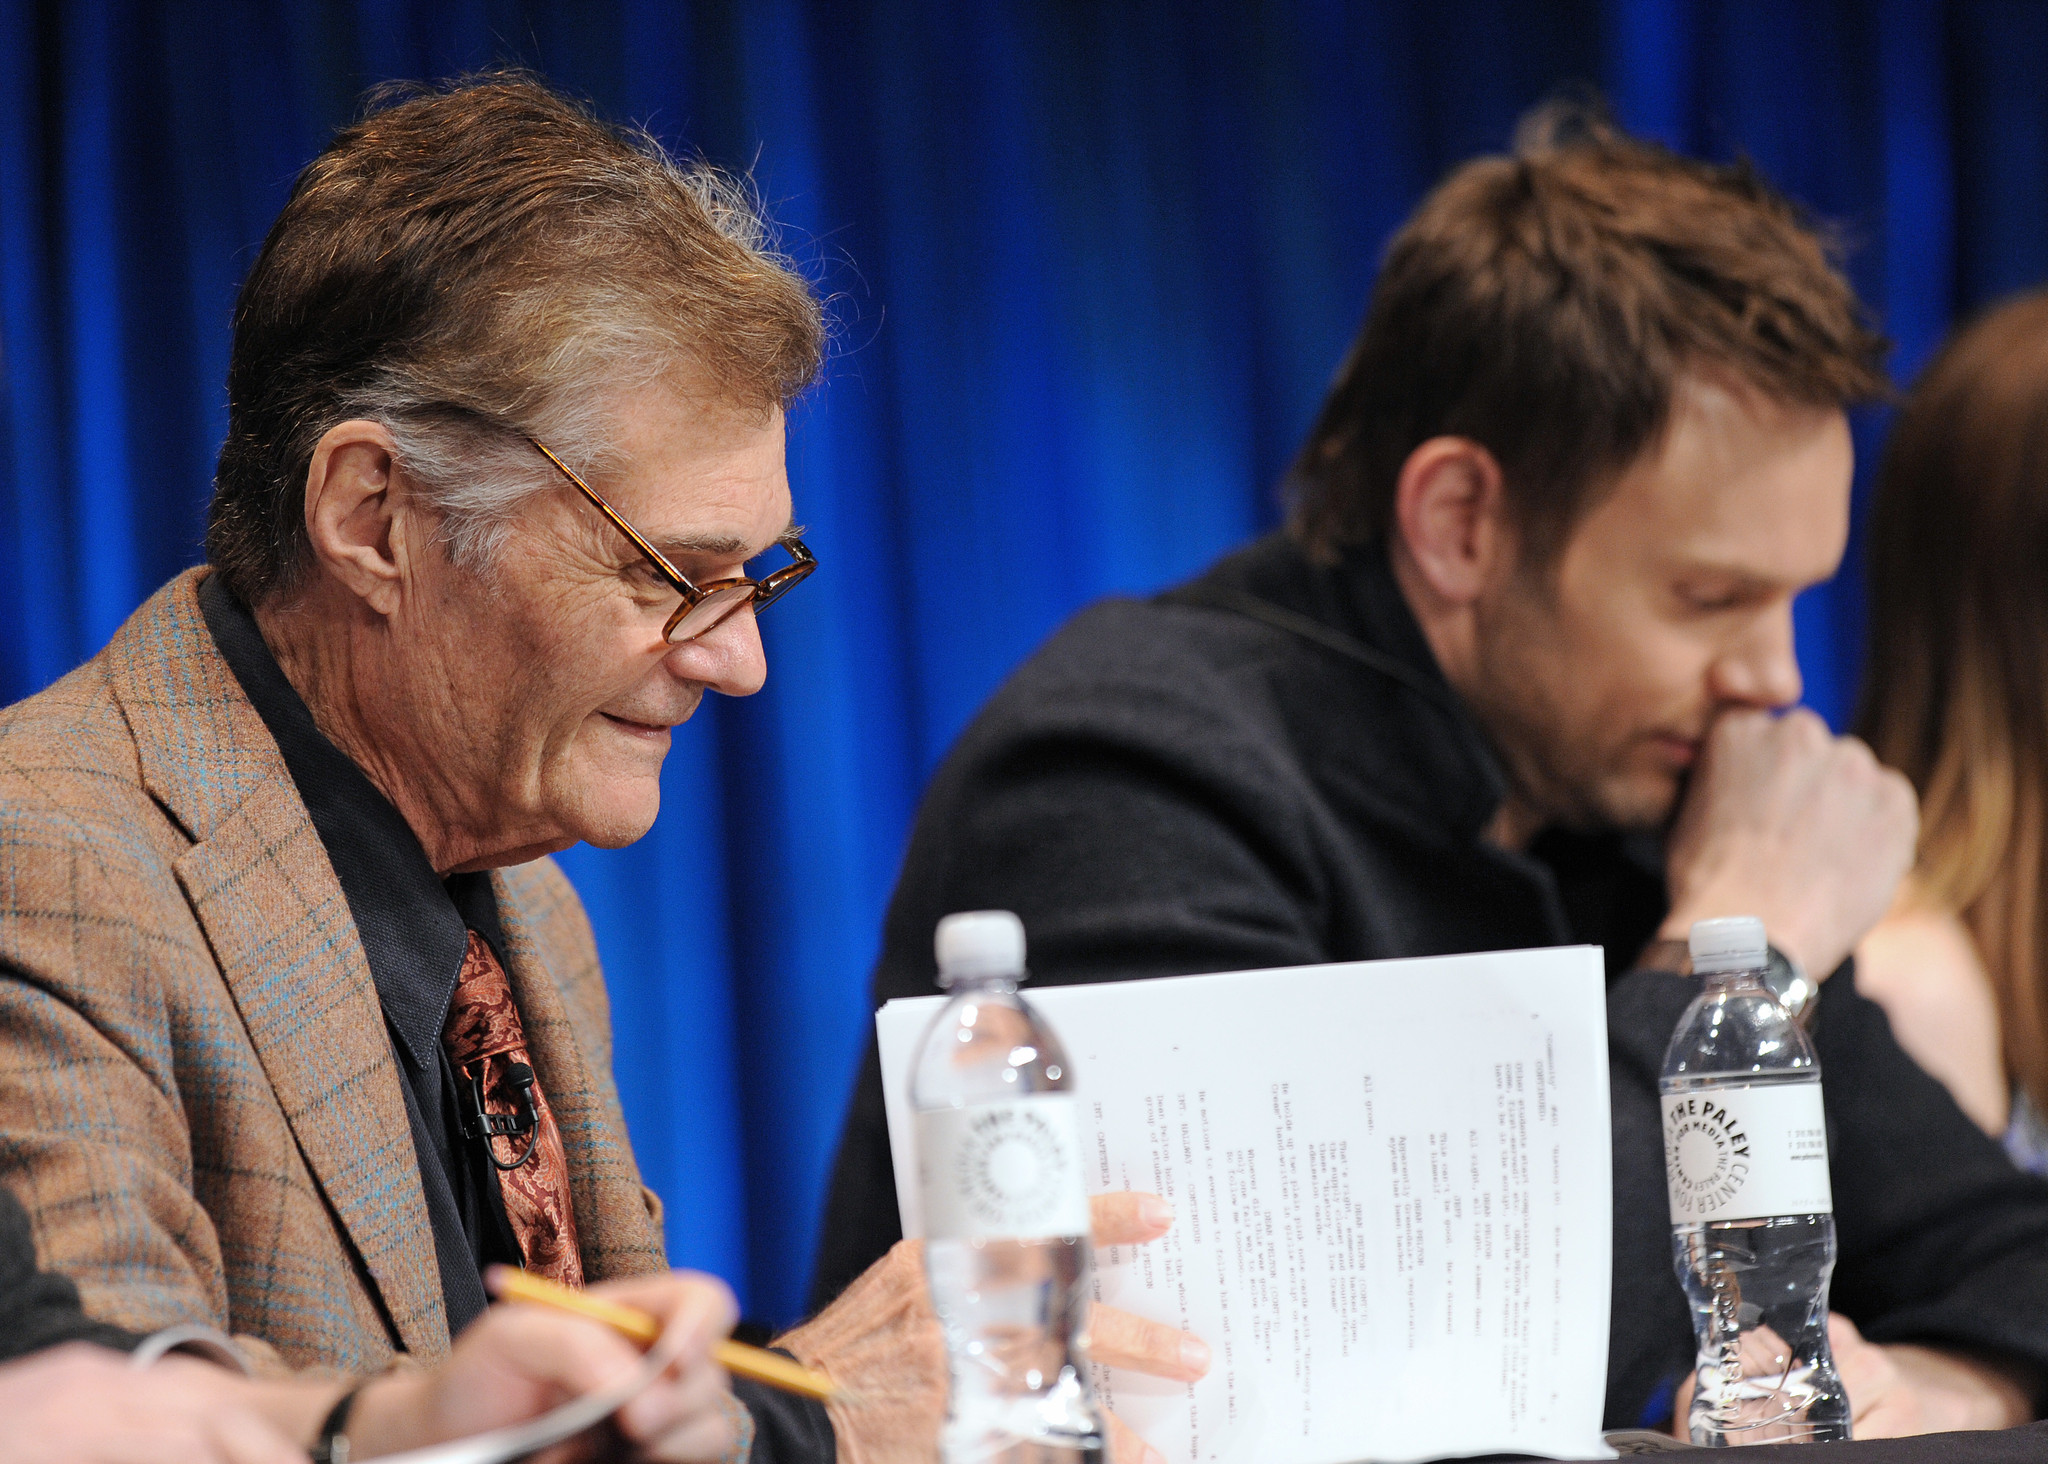 Joel McHale and Fred Willard at event of Community (2009)